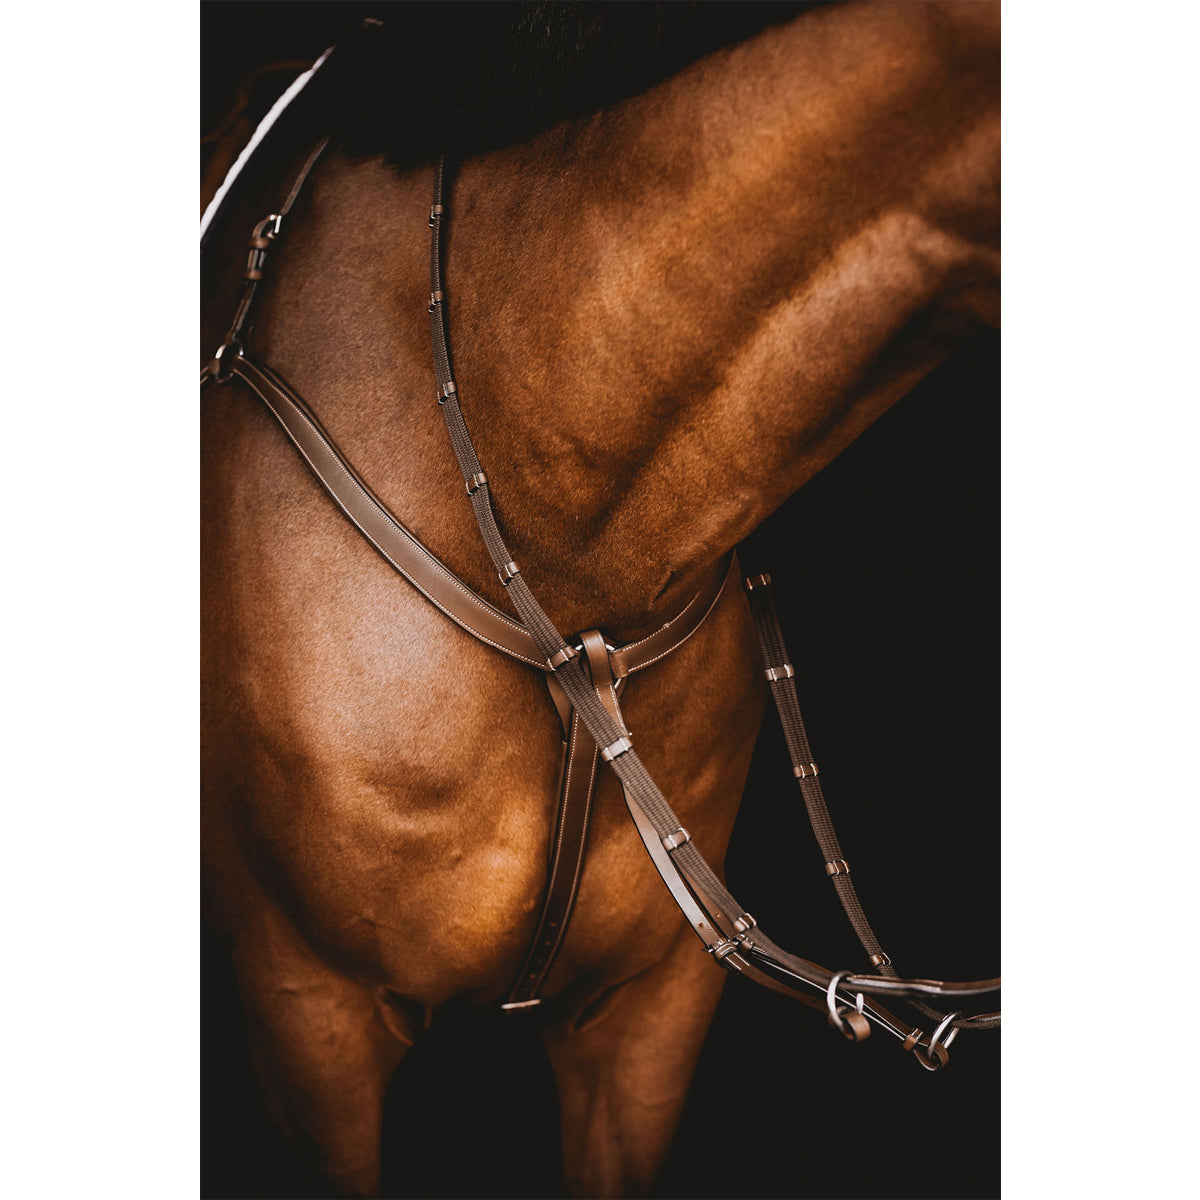 Arion Anatomic 3 Point Breastplate- Sale